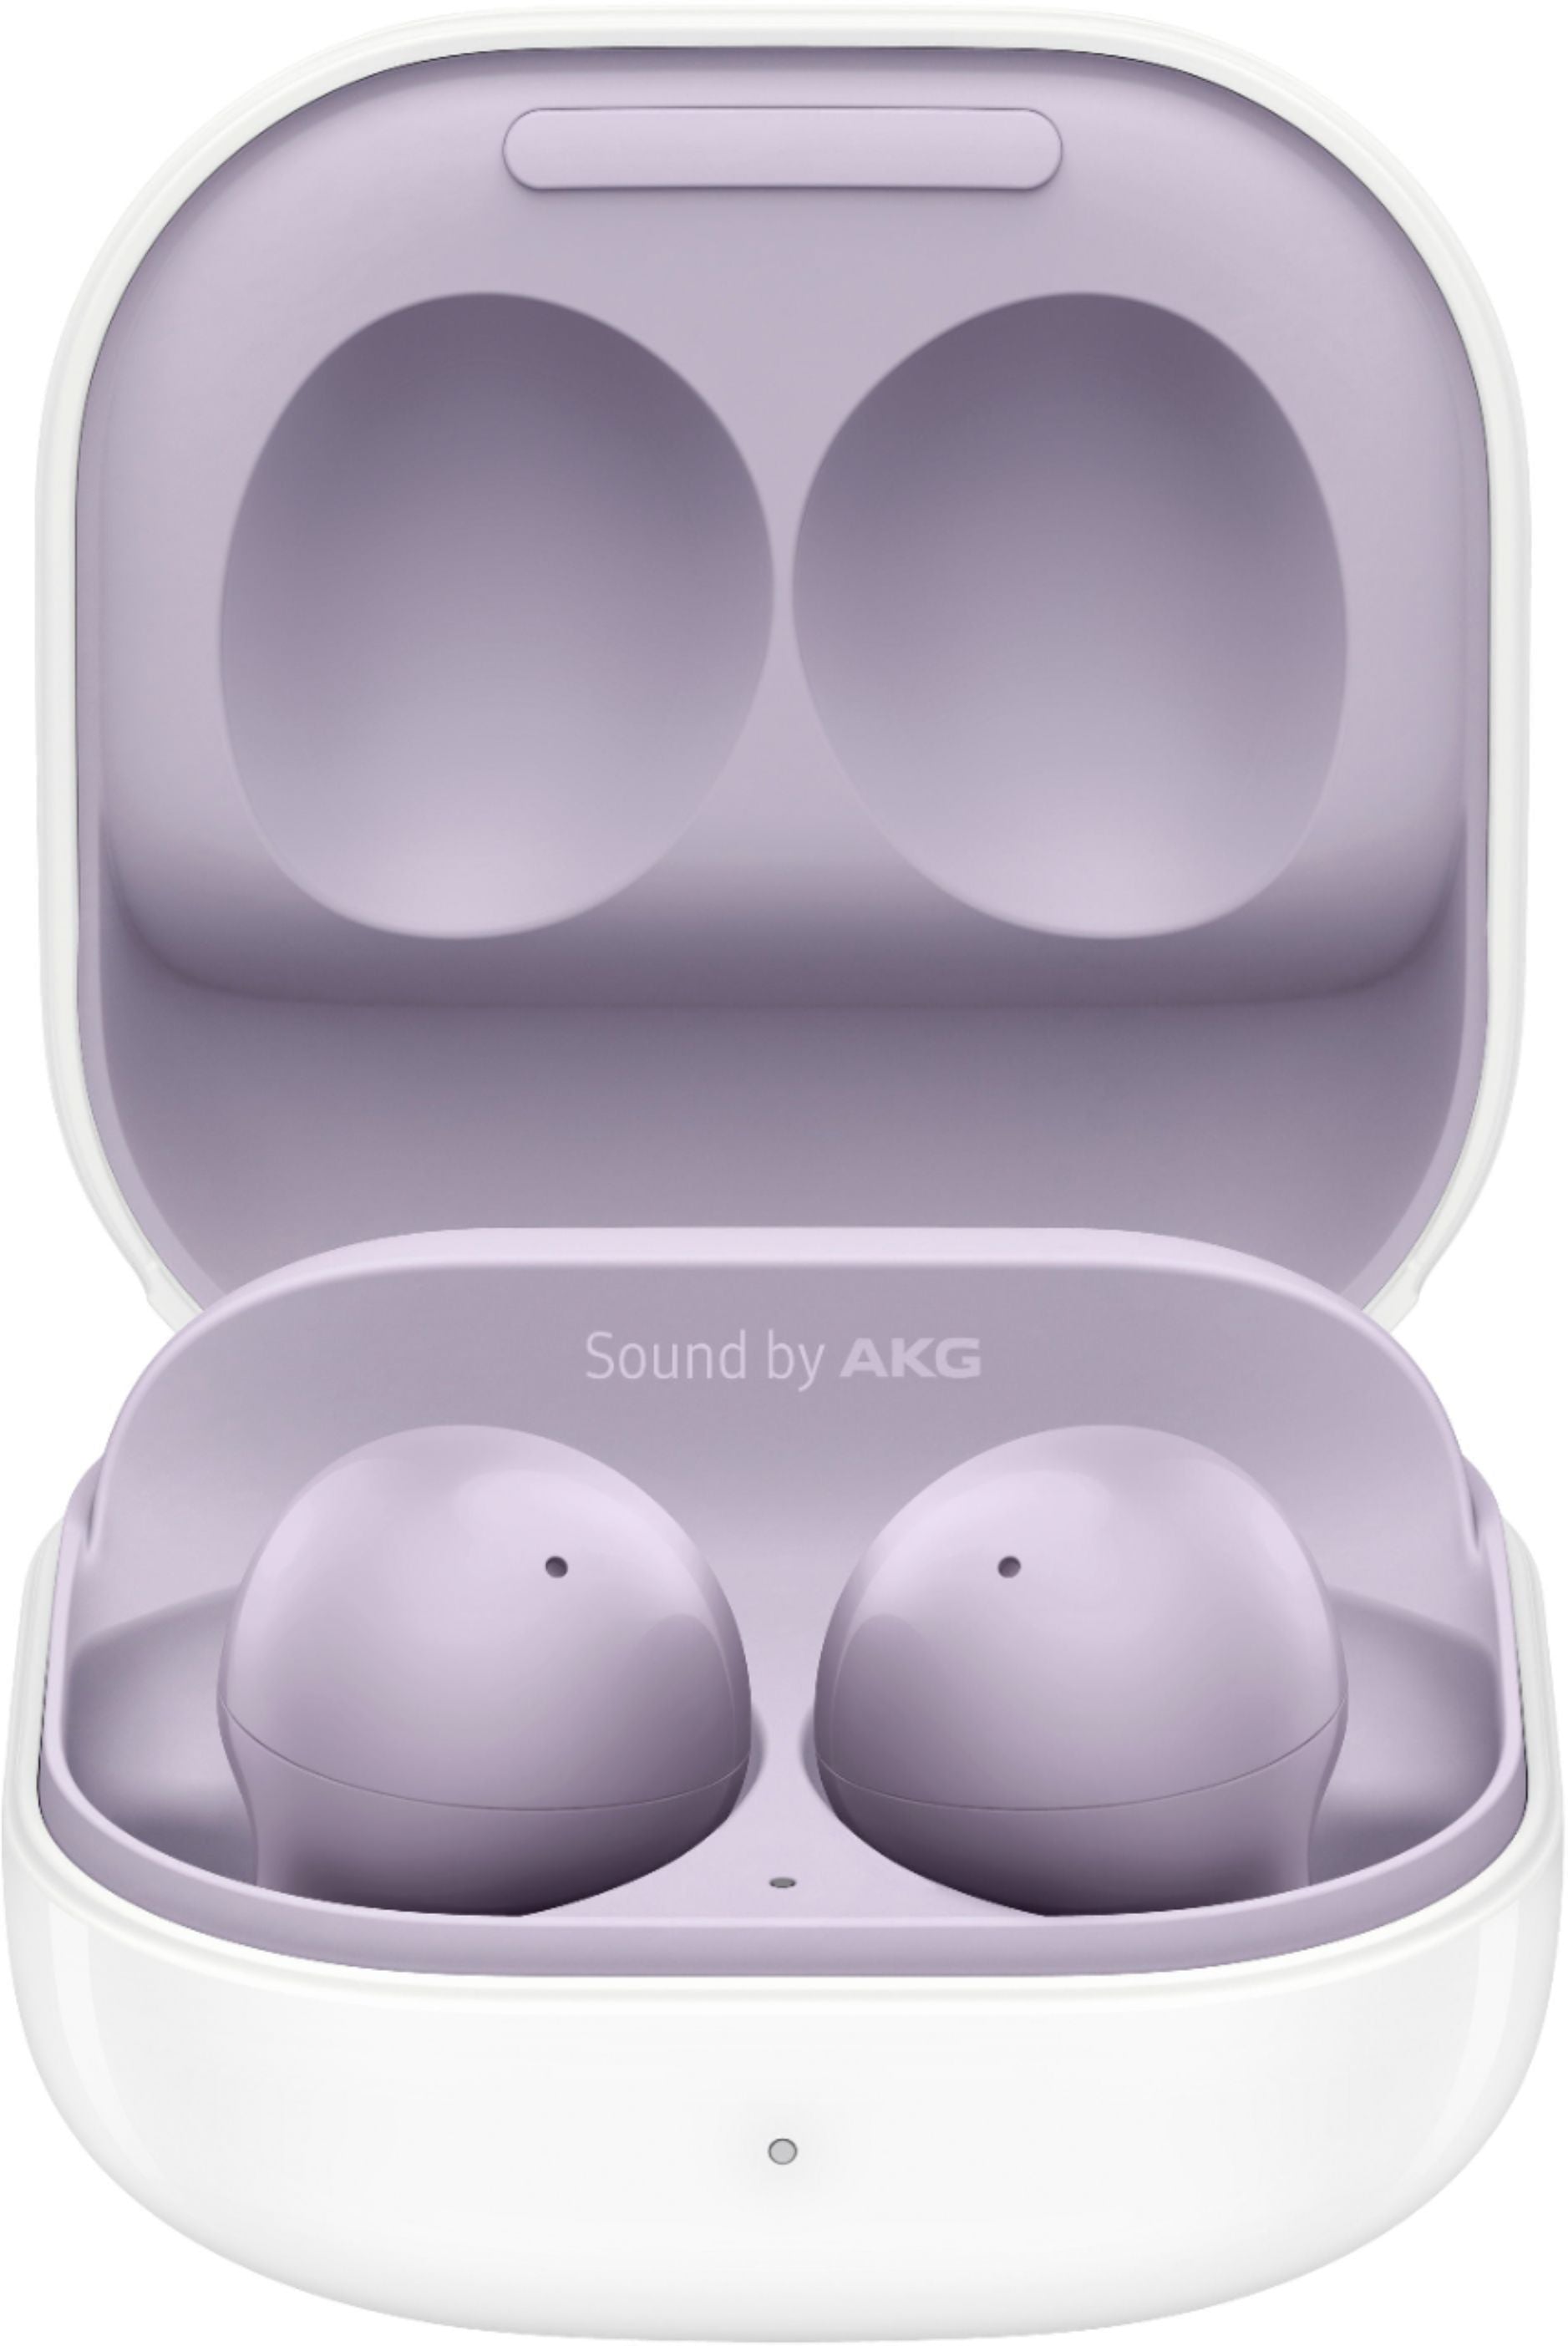 Samsung Galaxy Buds2 True Wireless Noise Cancelling Bluetooth Earbuds - Lavender (Certified Refurbished)